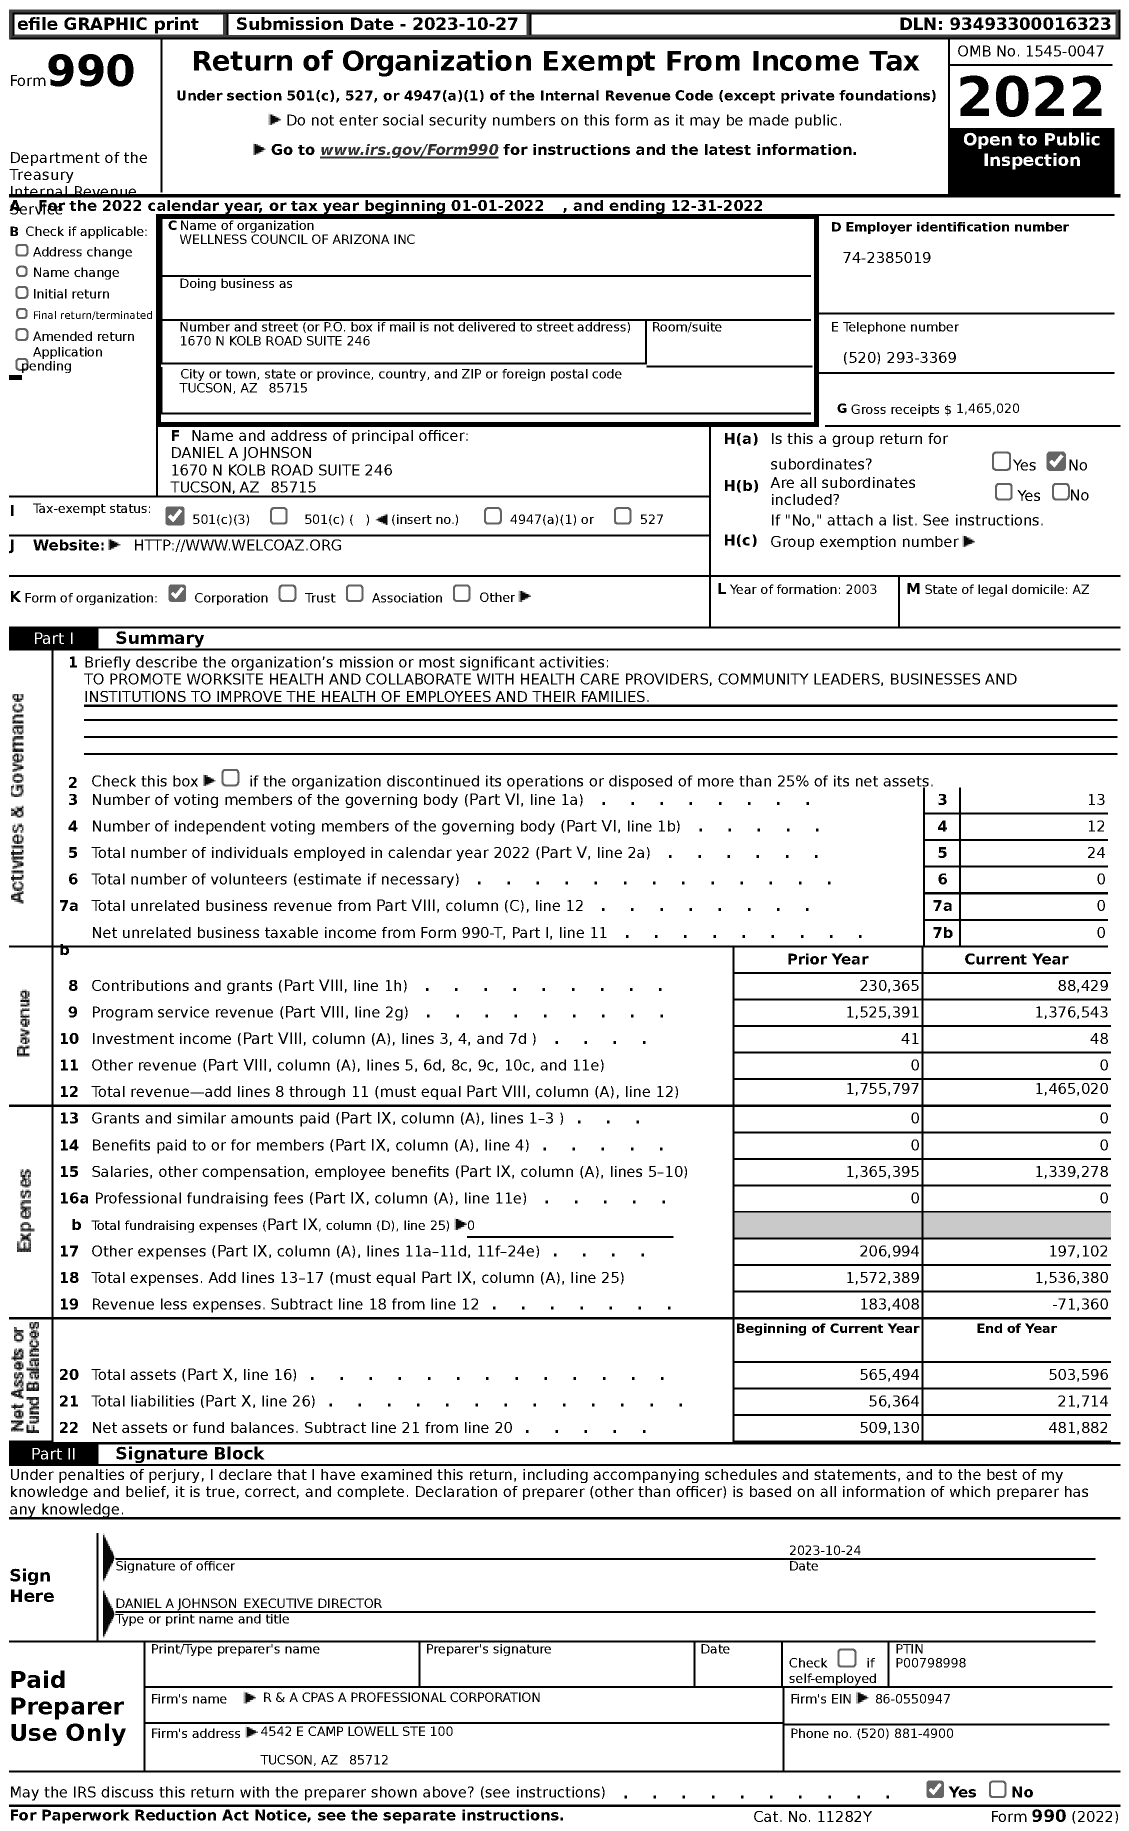 Image of first page of 2022 Form 990 for Wellness Council of Arizona (WELCOAZ)